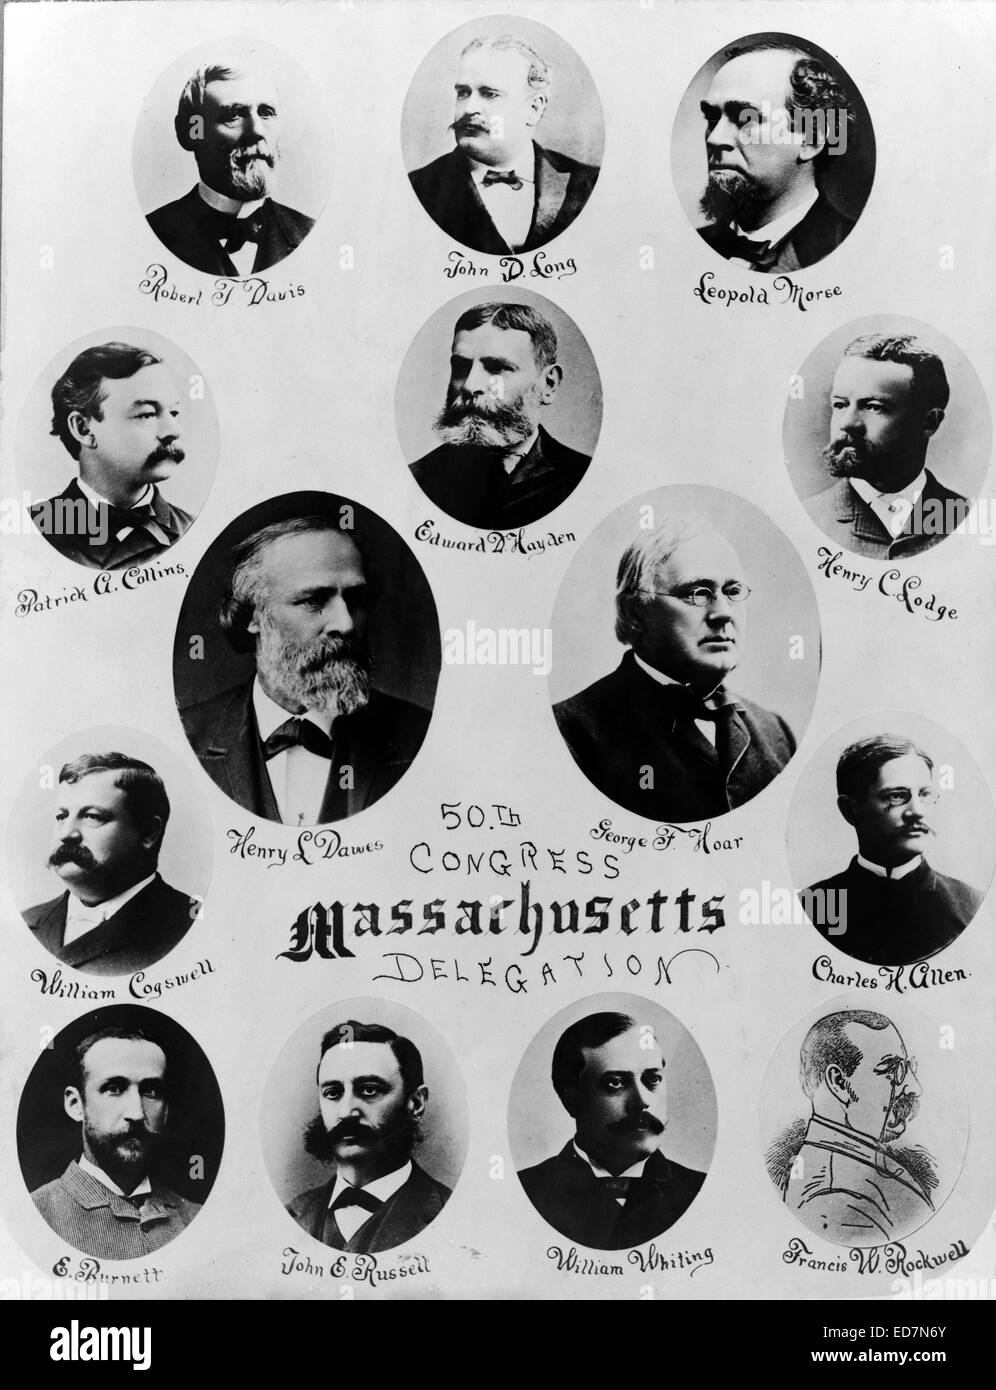 Composite of fourteen head-and-shoulders portraits of 50th Congress Massachusetts delegates including: Robert Davis, John D. Long, Leopold Morse, Patrick A. Collins, Edward D. Hayden, Henry C. Lodge, Henry L. Dawes, George F. Hoar, William Cogswell, Charles H. Allen, E. Burnett, John E. Russell, William Whiting, and Francis W. Rockwell. 1888 Stock Photo